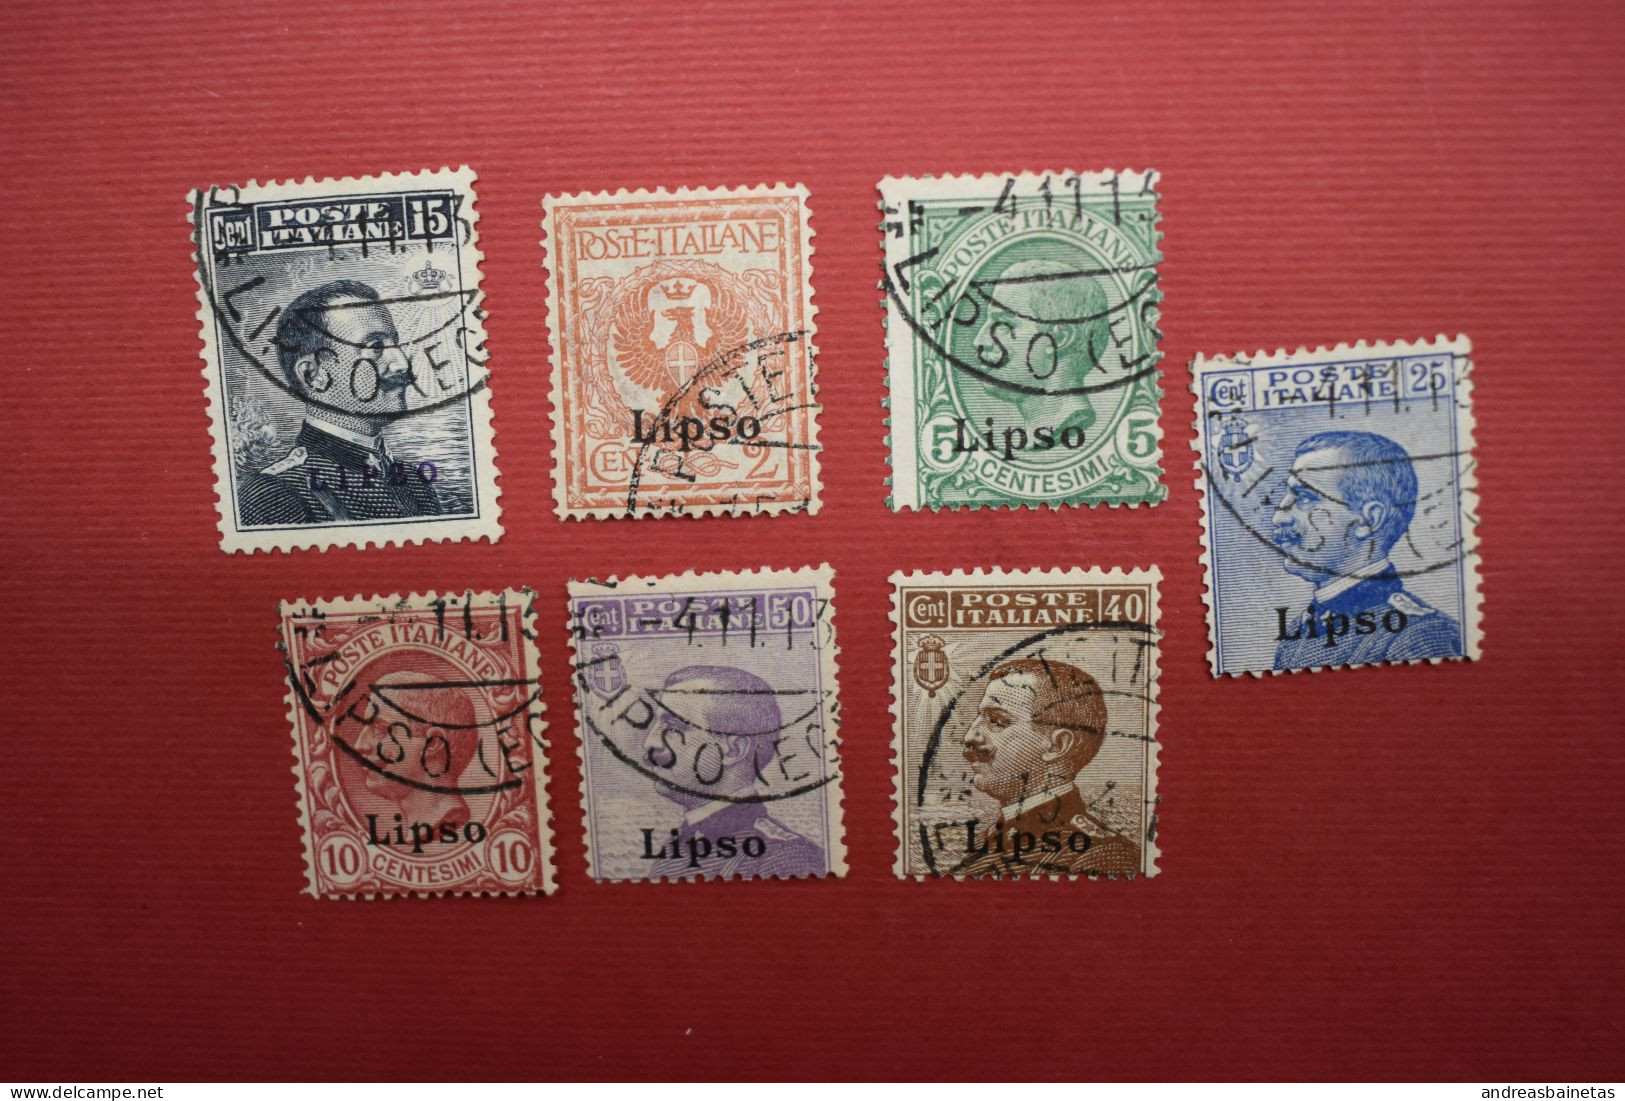 Stamps Greece ITALIAN OCCUPATION - ITALIAN POST 1912 "LIPSO" Ovpt, Complete Set Of 7 Values Used (Hellas 3VII/9VII). - Dodekanesos